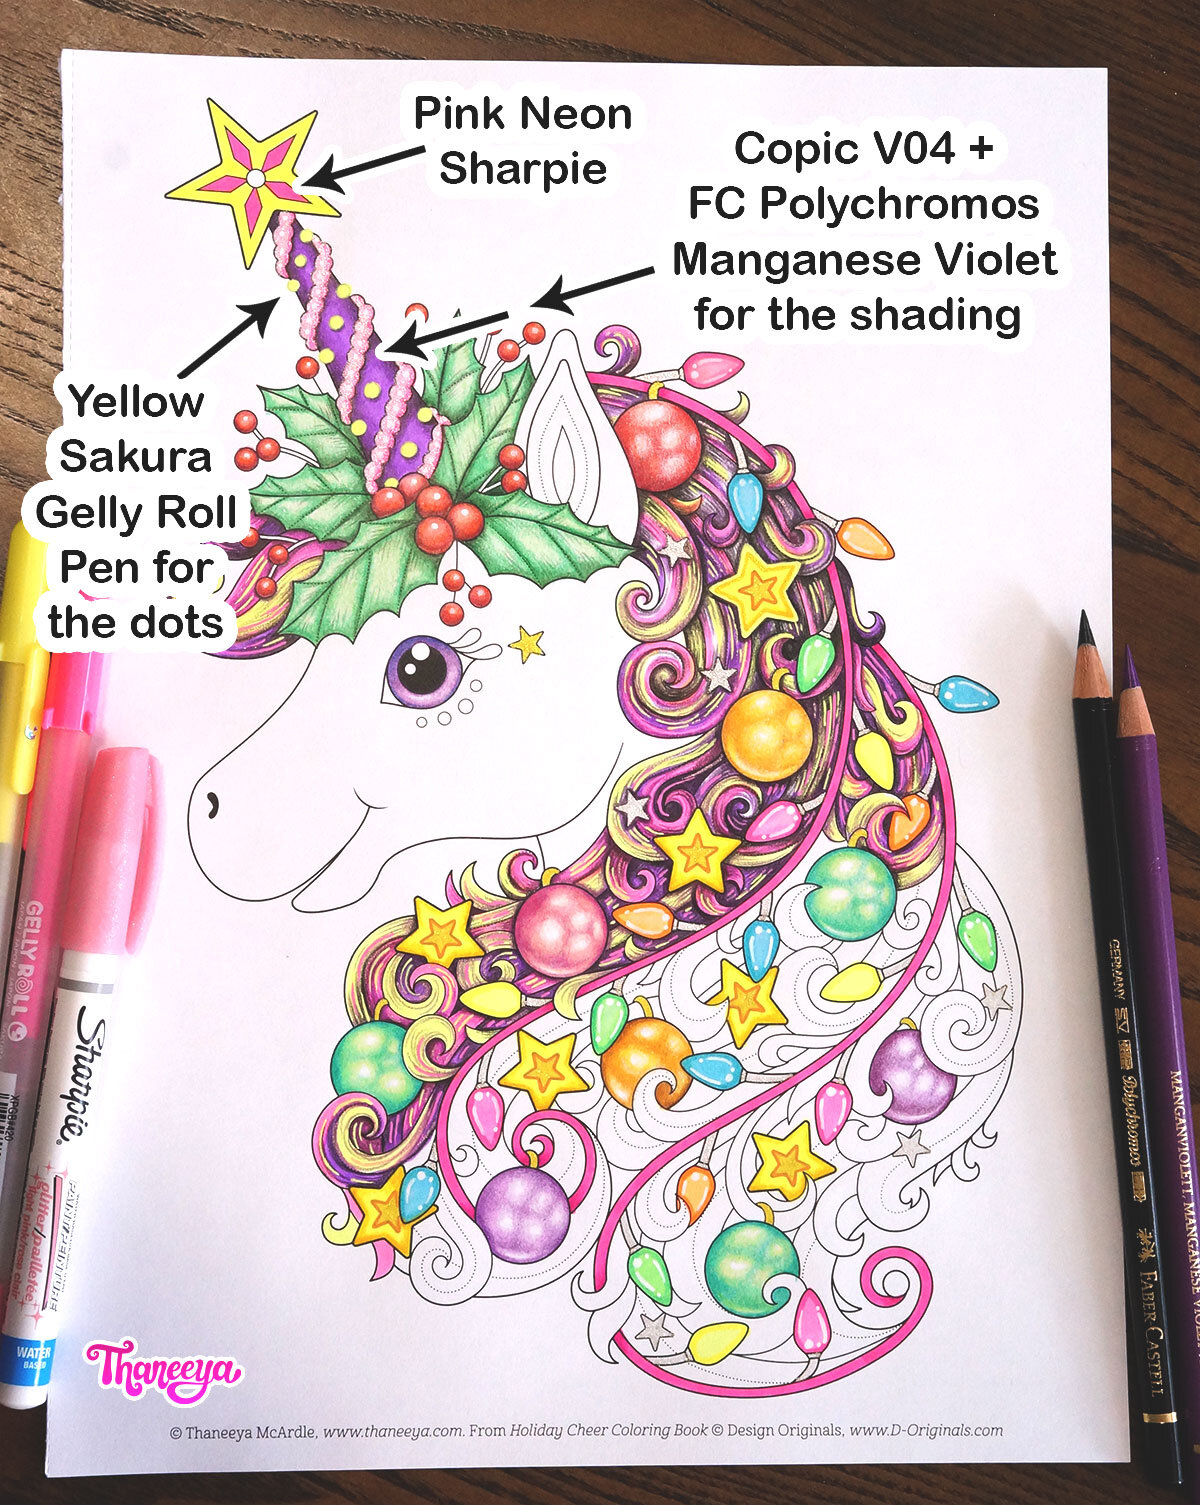 Christmas Coloring Book by Thaneeya McArdle —